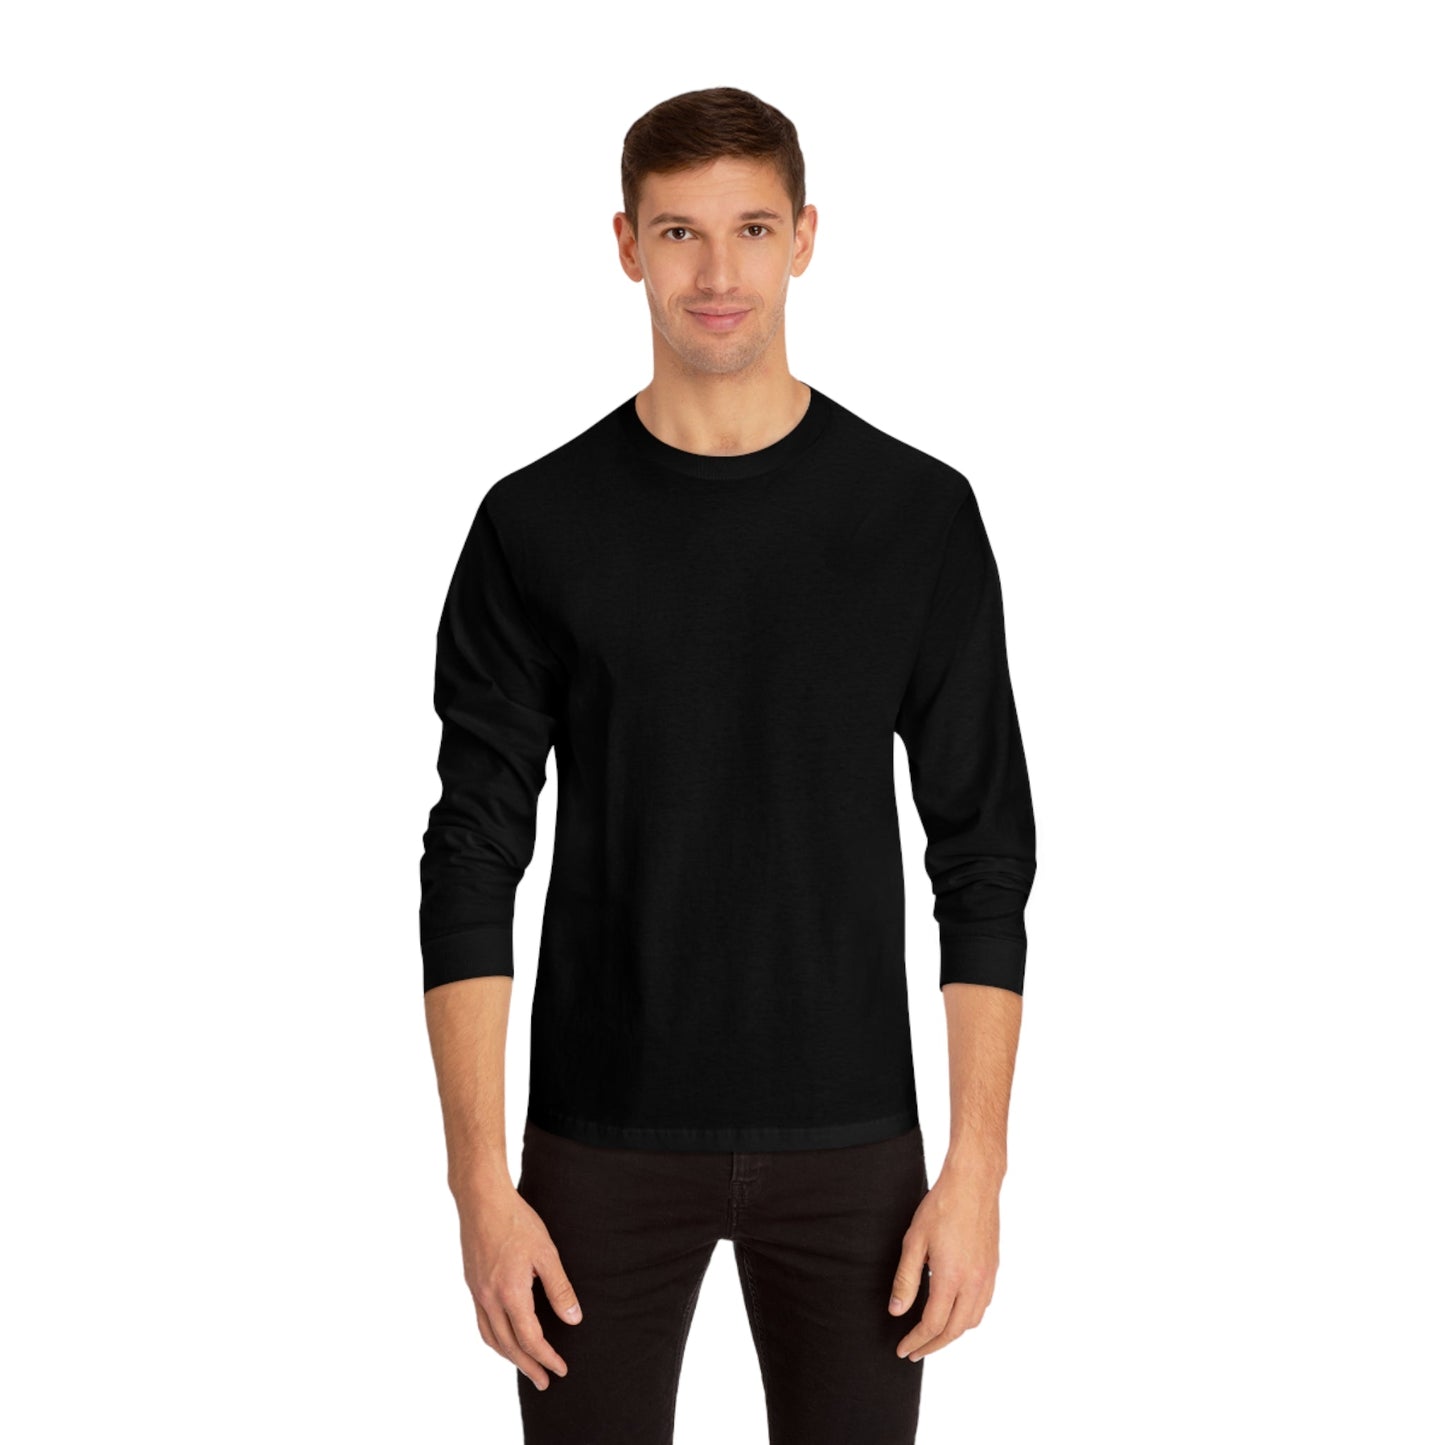 My soundstage is bigger than yours long-sleeve. black on black - Pure Neo Shop